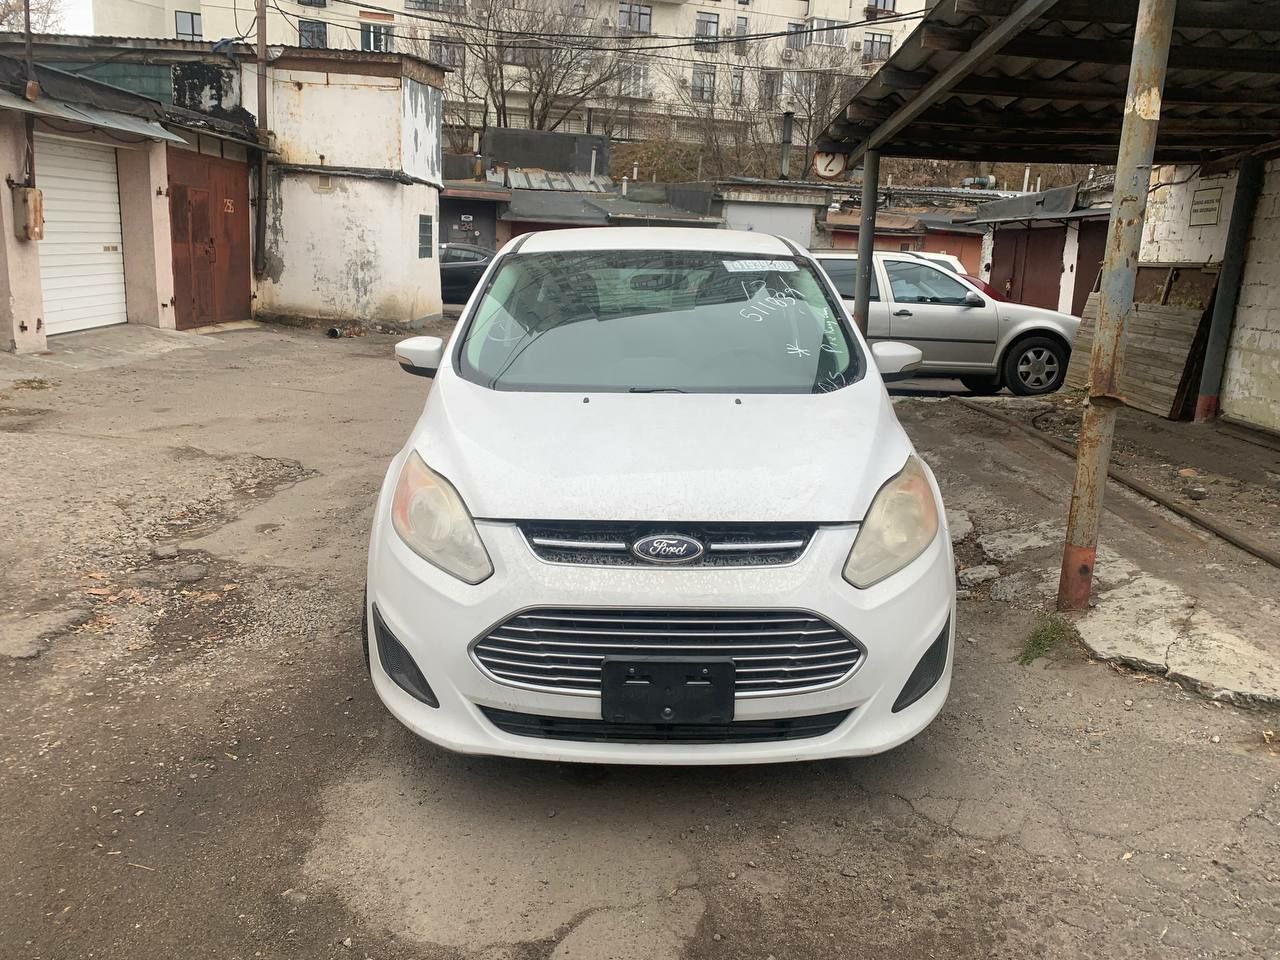 Ford C-Max Hybrid USA 2012-2018 Разборка Зеркало Дзеркало Запчасти США